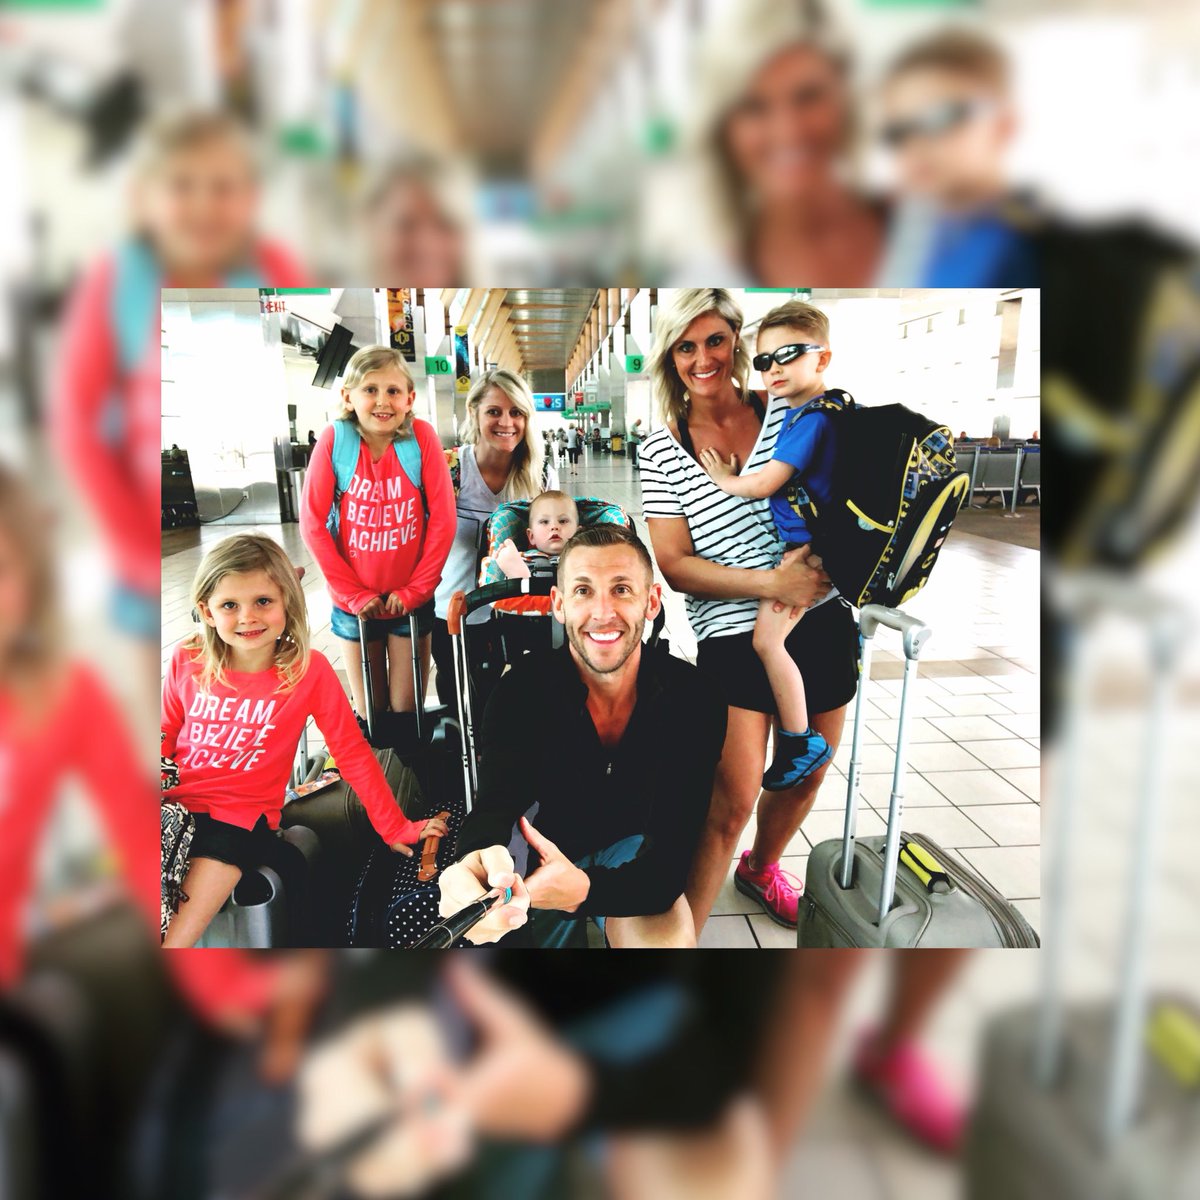 Family travel is fun, especially with 4 kids, 5 suitcases, 5 backpacks🎒, and a nanny! All carry-on, no checked baggage, 4 day trip to Seaside, FL. #efficienttravel #minimalluggage #bagstobeaches #travelbloggers